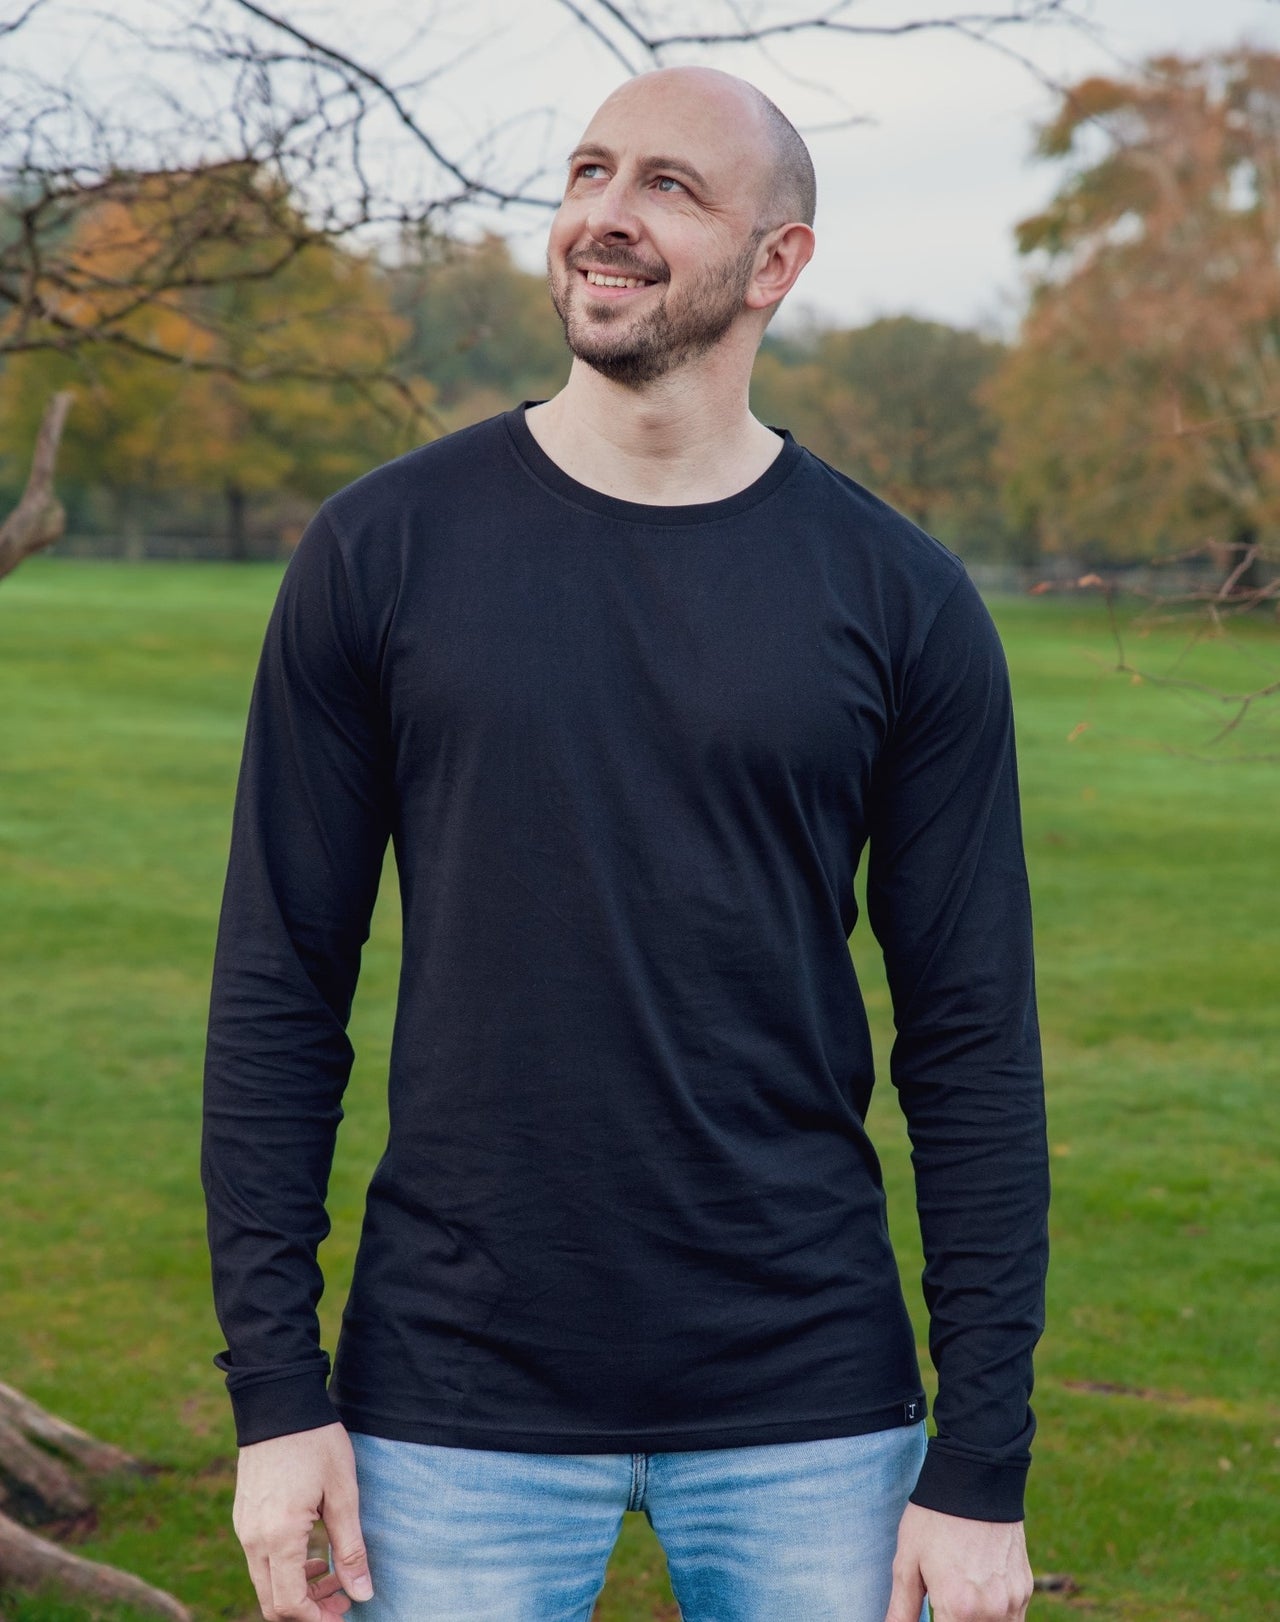 A tall athletic guy in a park, looking up at the sky and wearing a black long sleeve tall t-shirt.